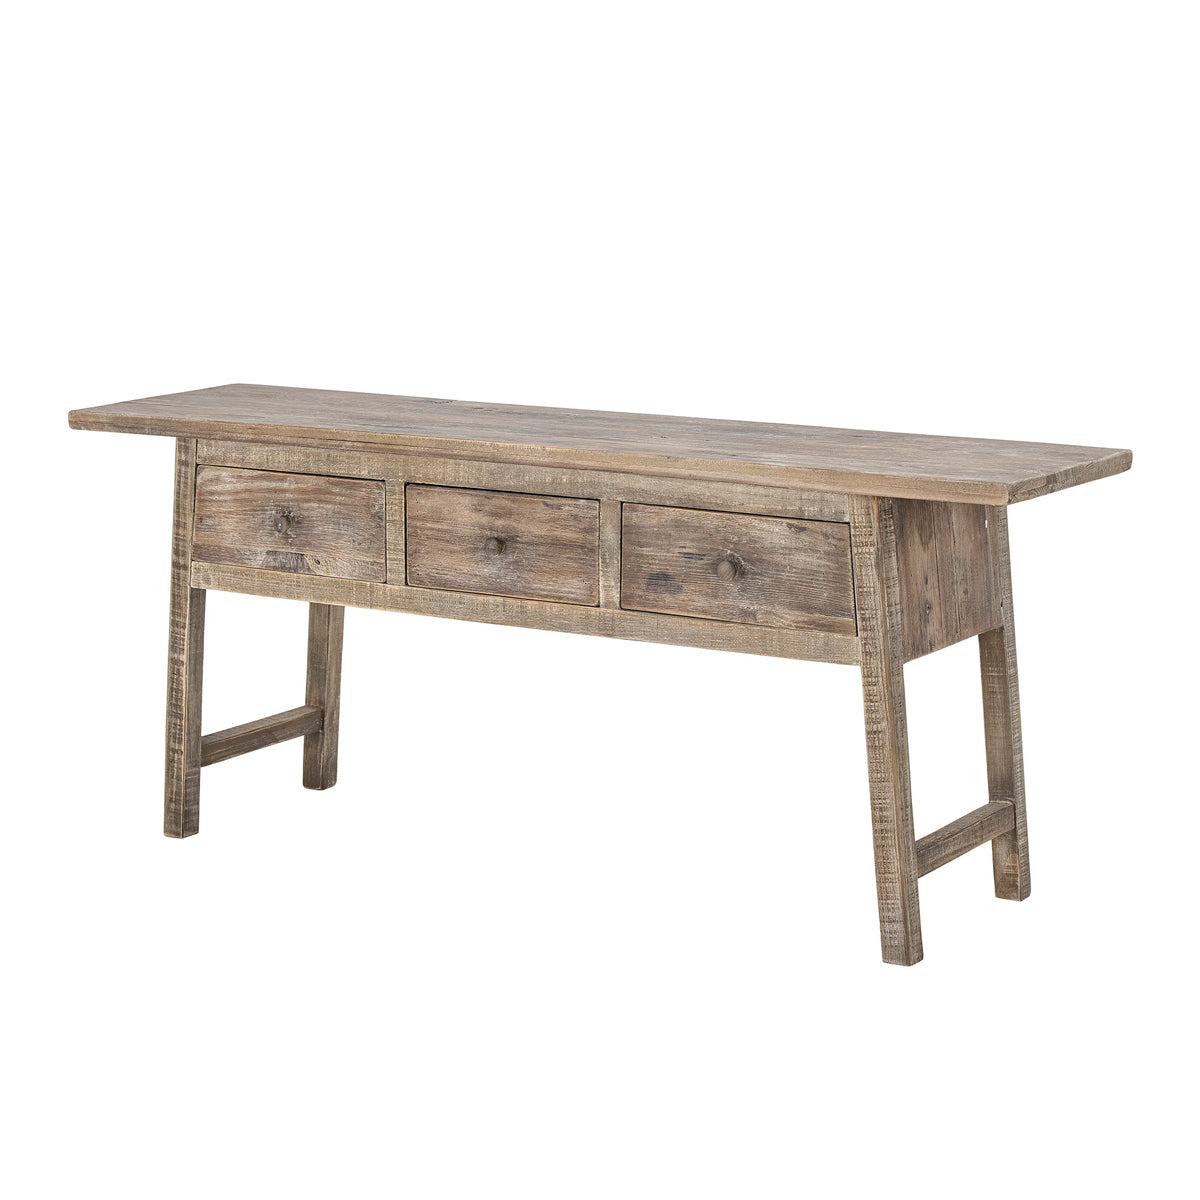 Bloomingville Camden Console Table, Nature, Reclaimed Pine Wood 82059354